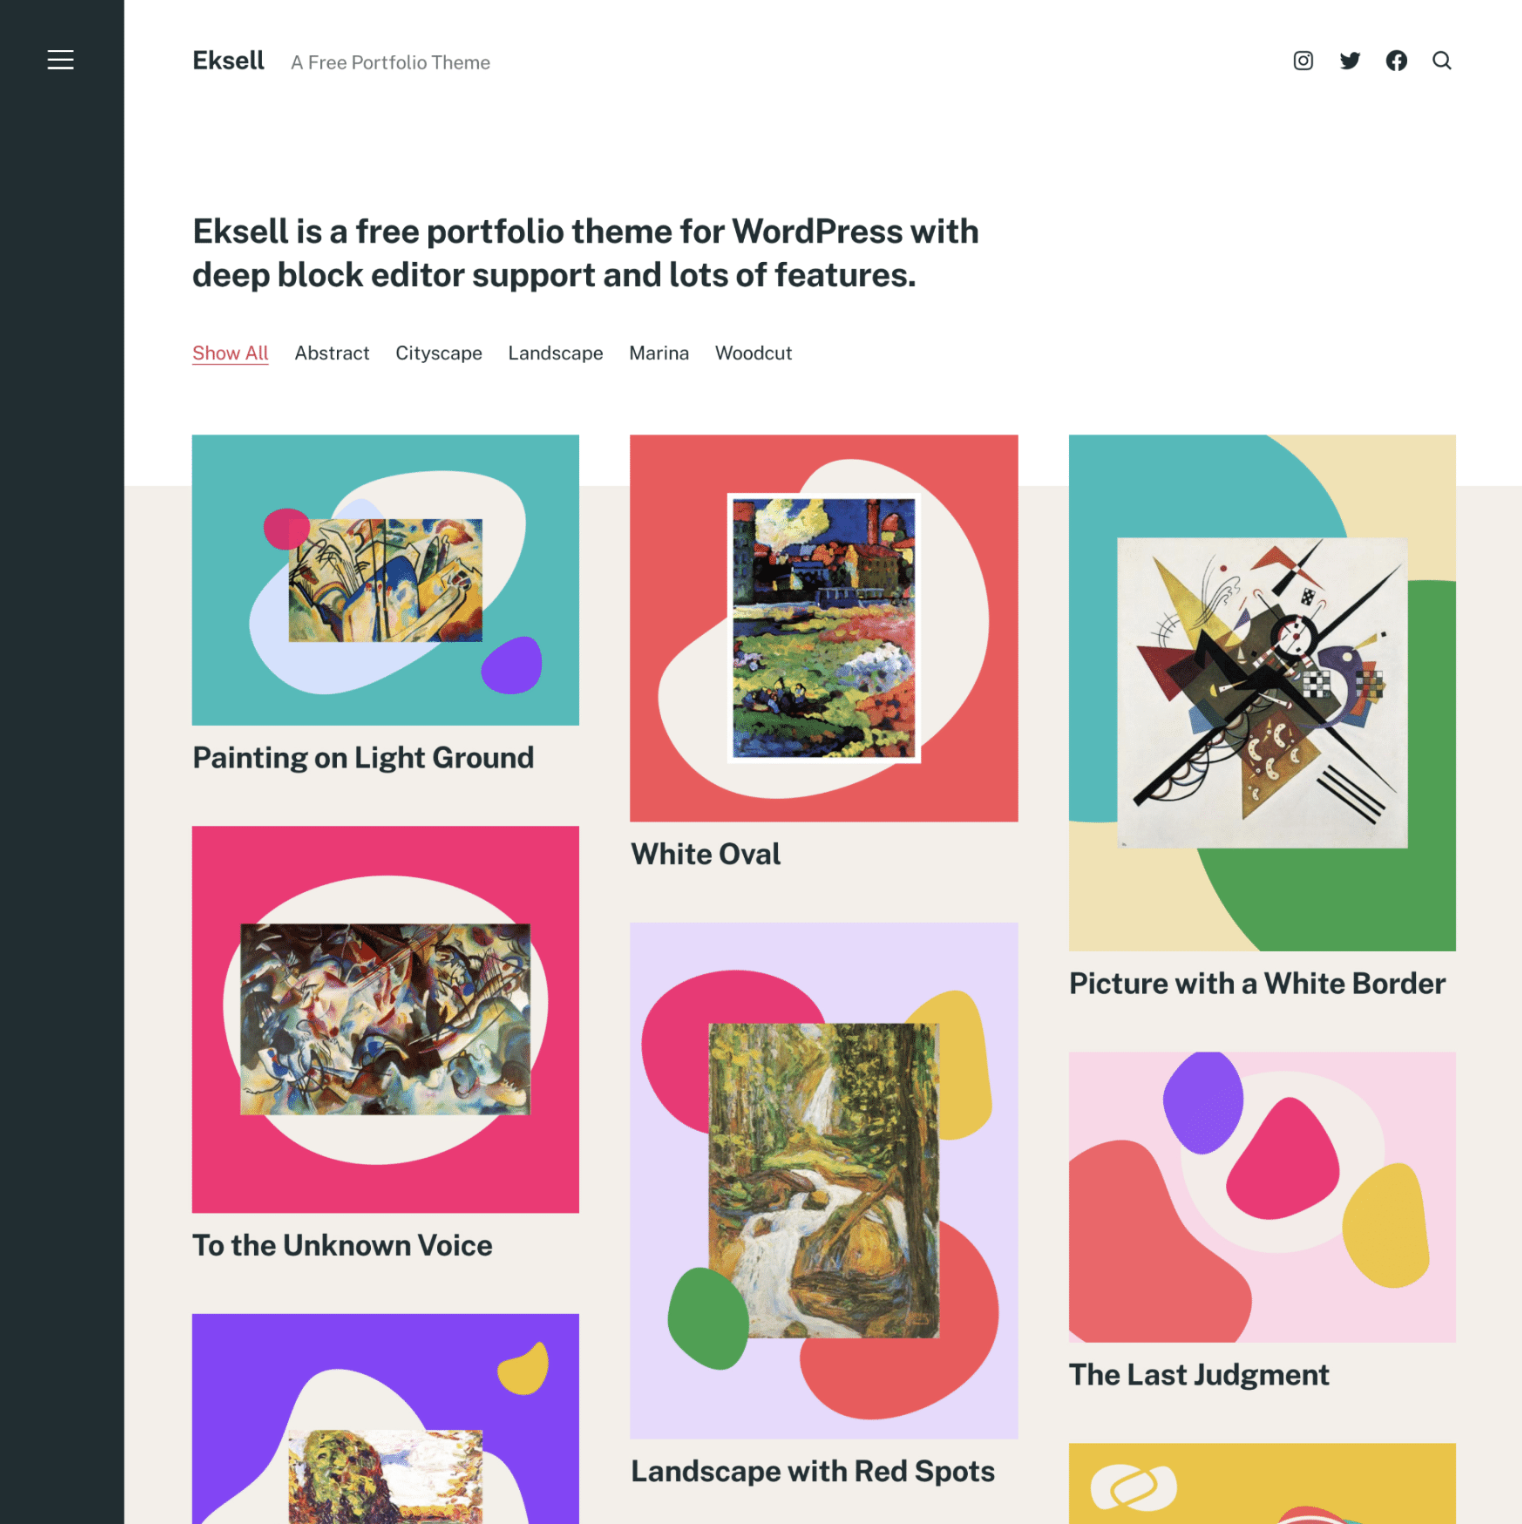 Eksell is a portfolio template that you can use for a blog based on the WordPress platform